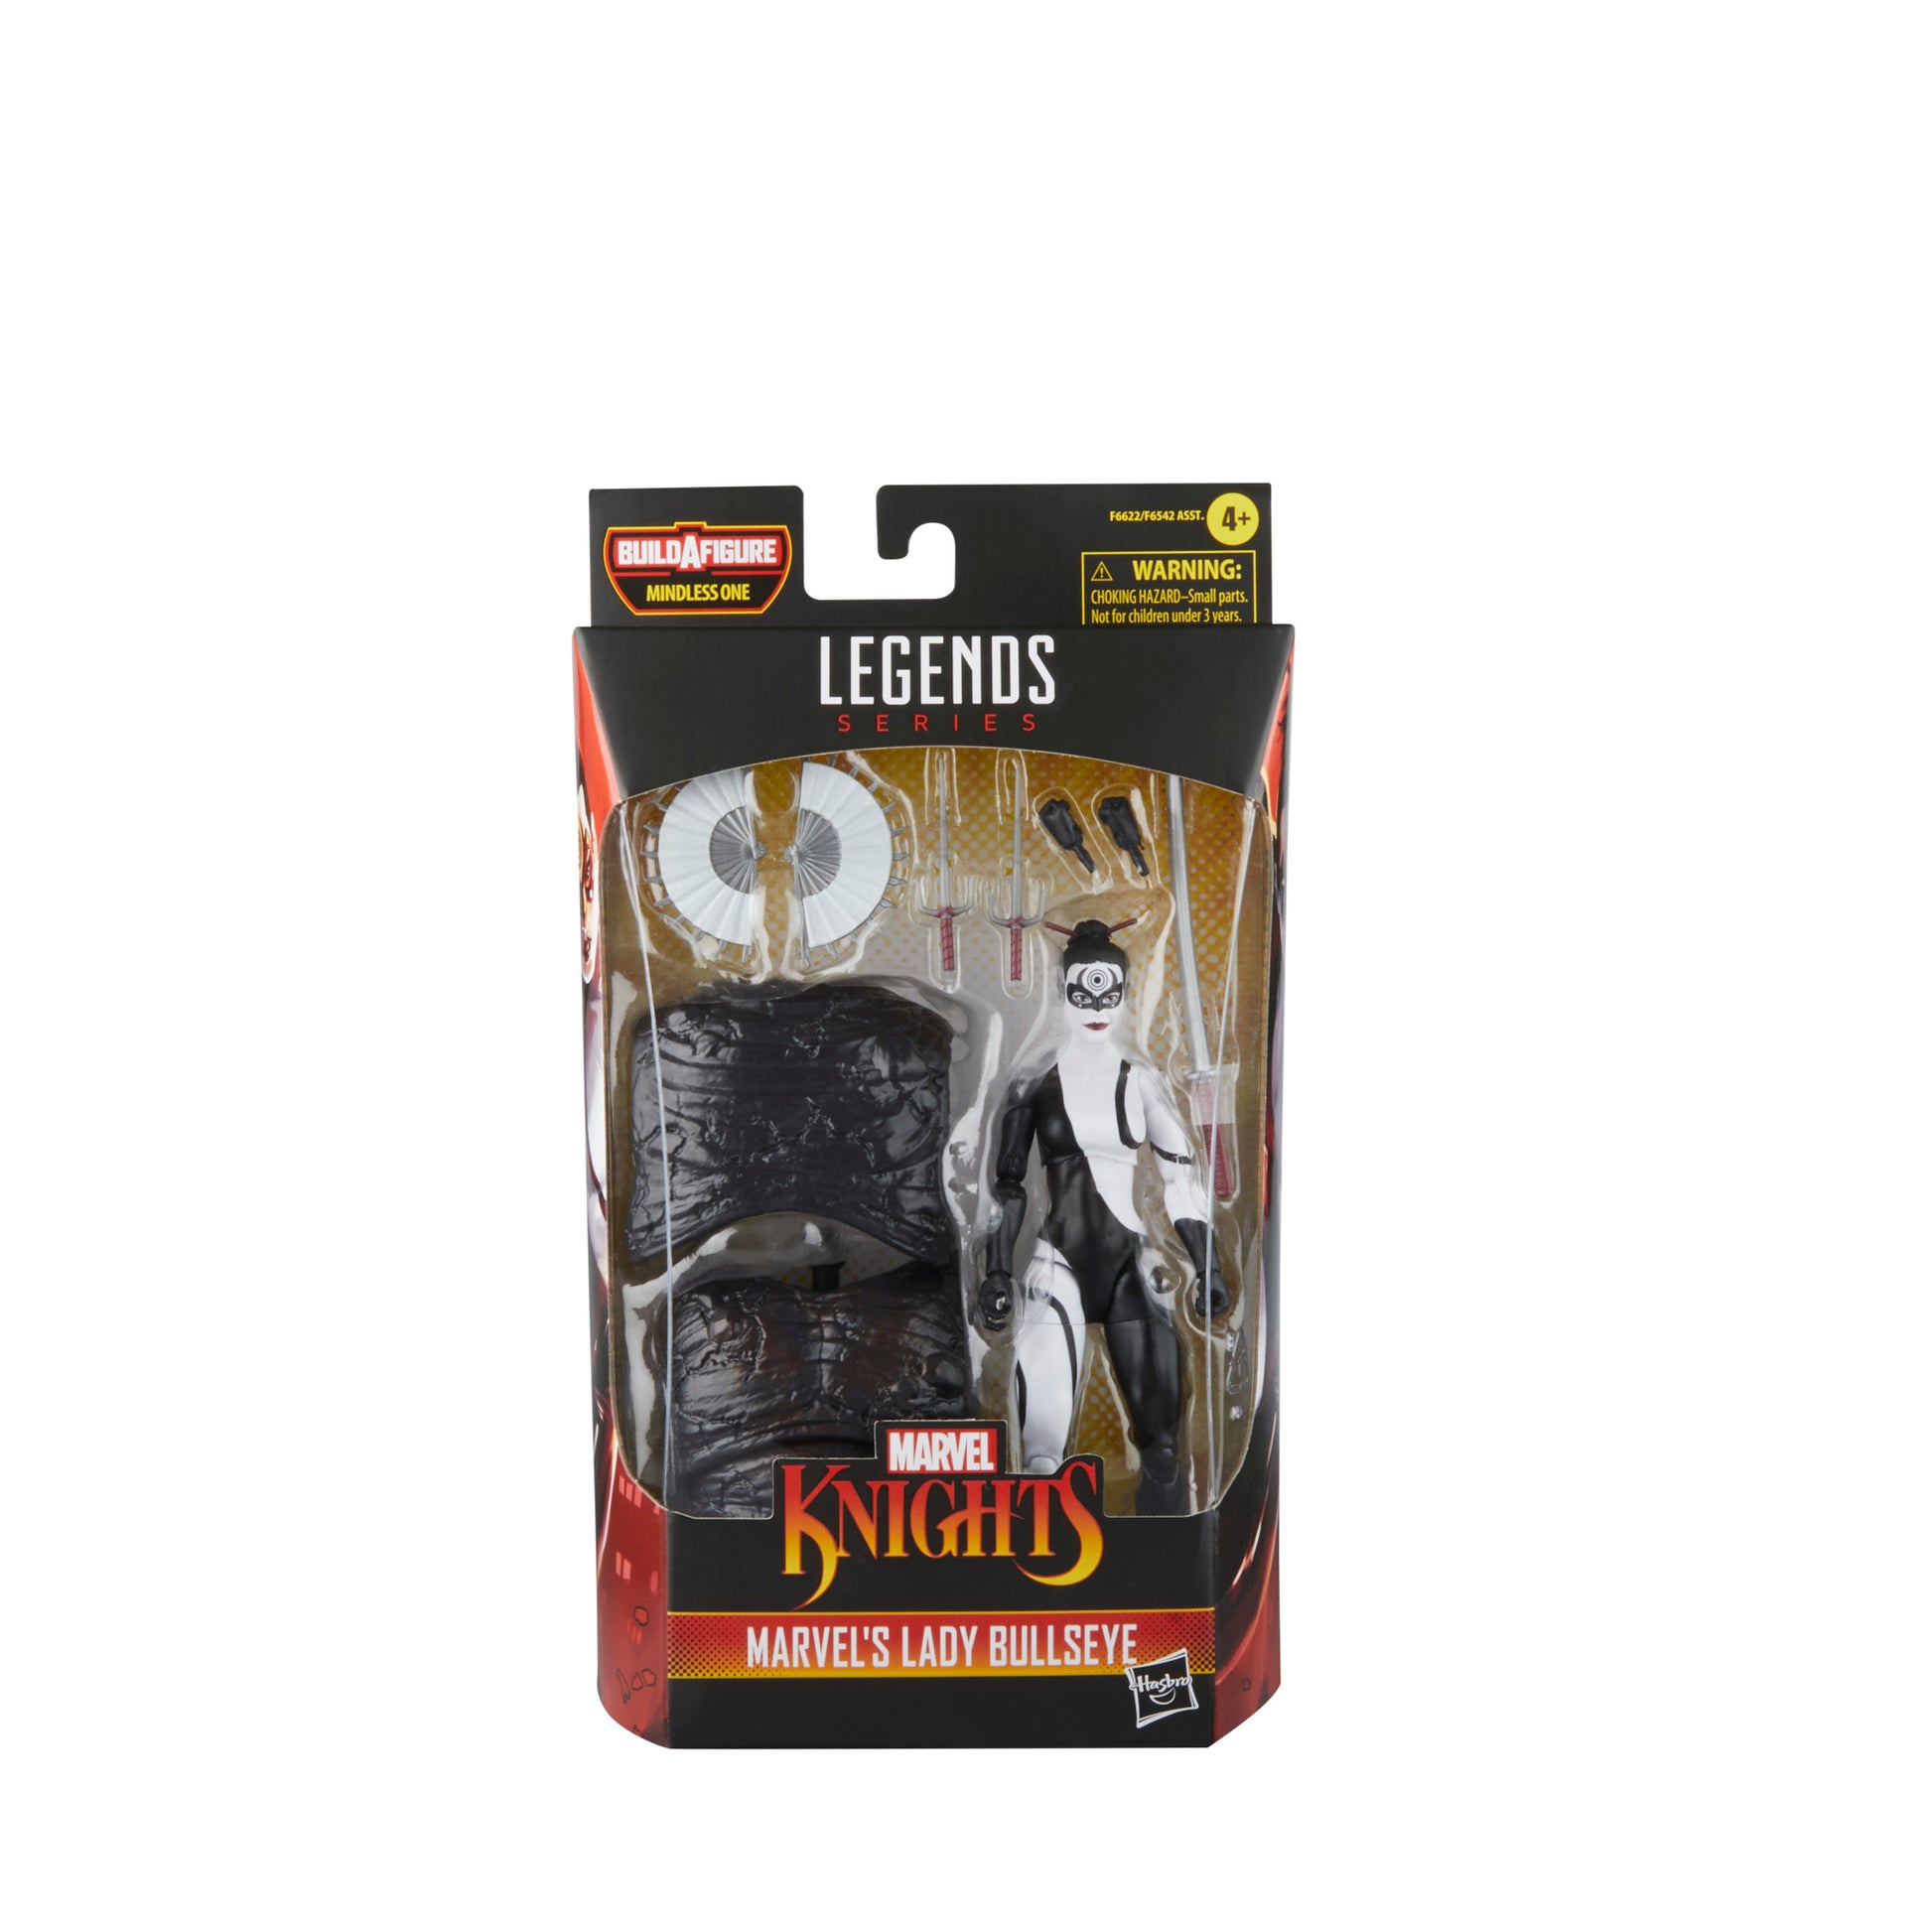 Hasbro Marvel Legends Series Marvel's Lady Bullseye Action Figure Toy front view of the package - Heretoserveyou